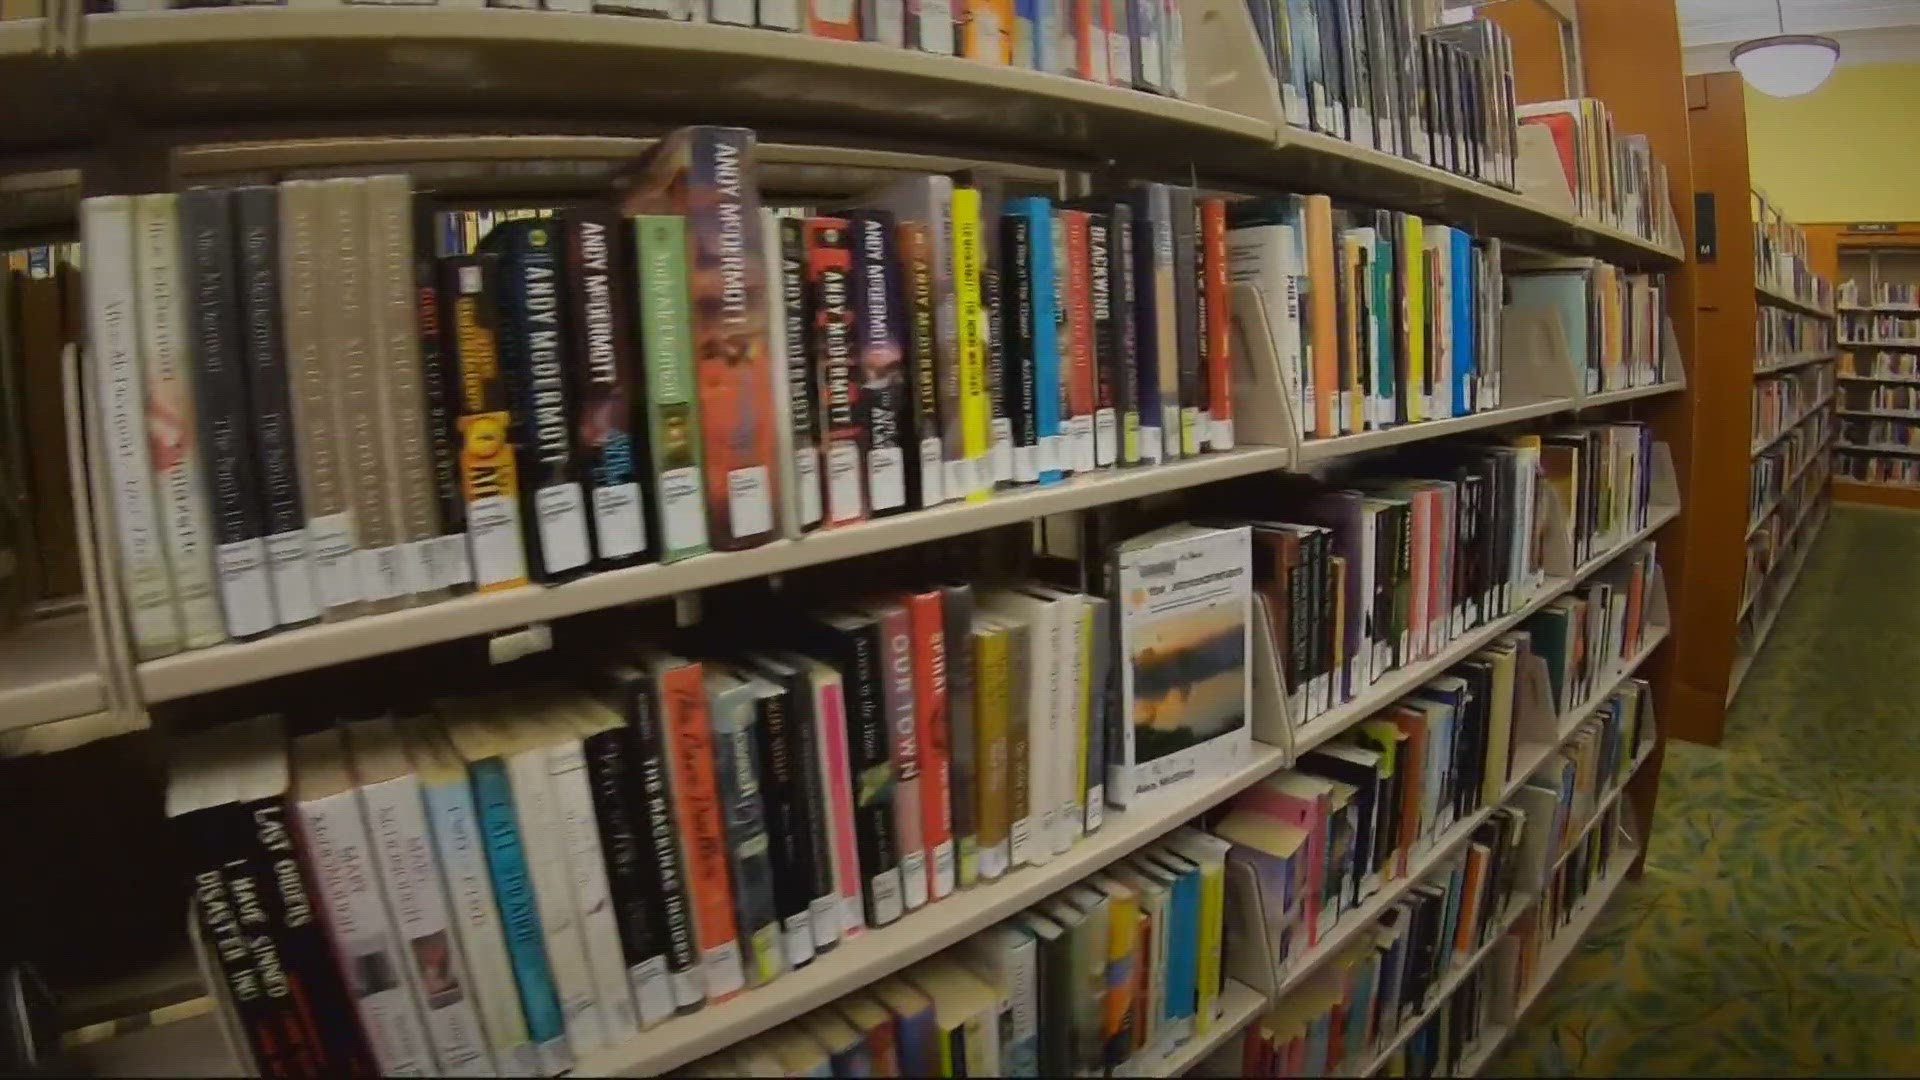 A recent audit of Multnomah County Libraries found 75% of the staff feel unsafe at work.